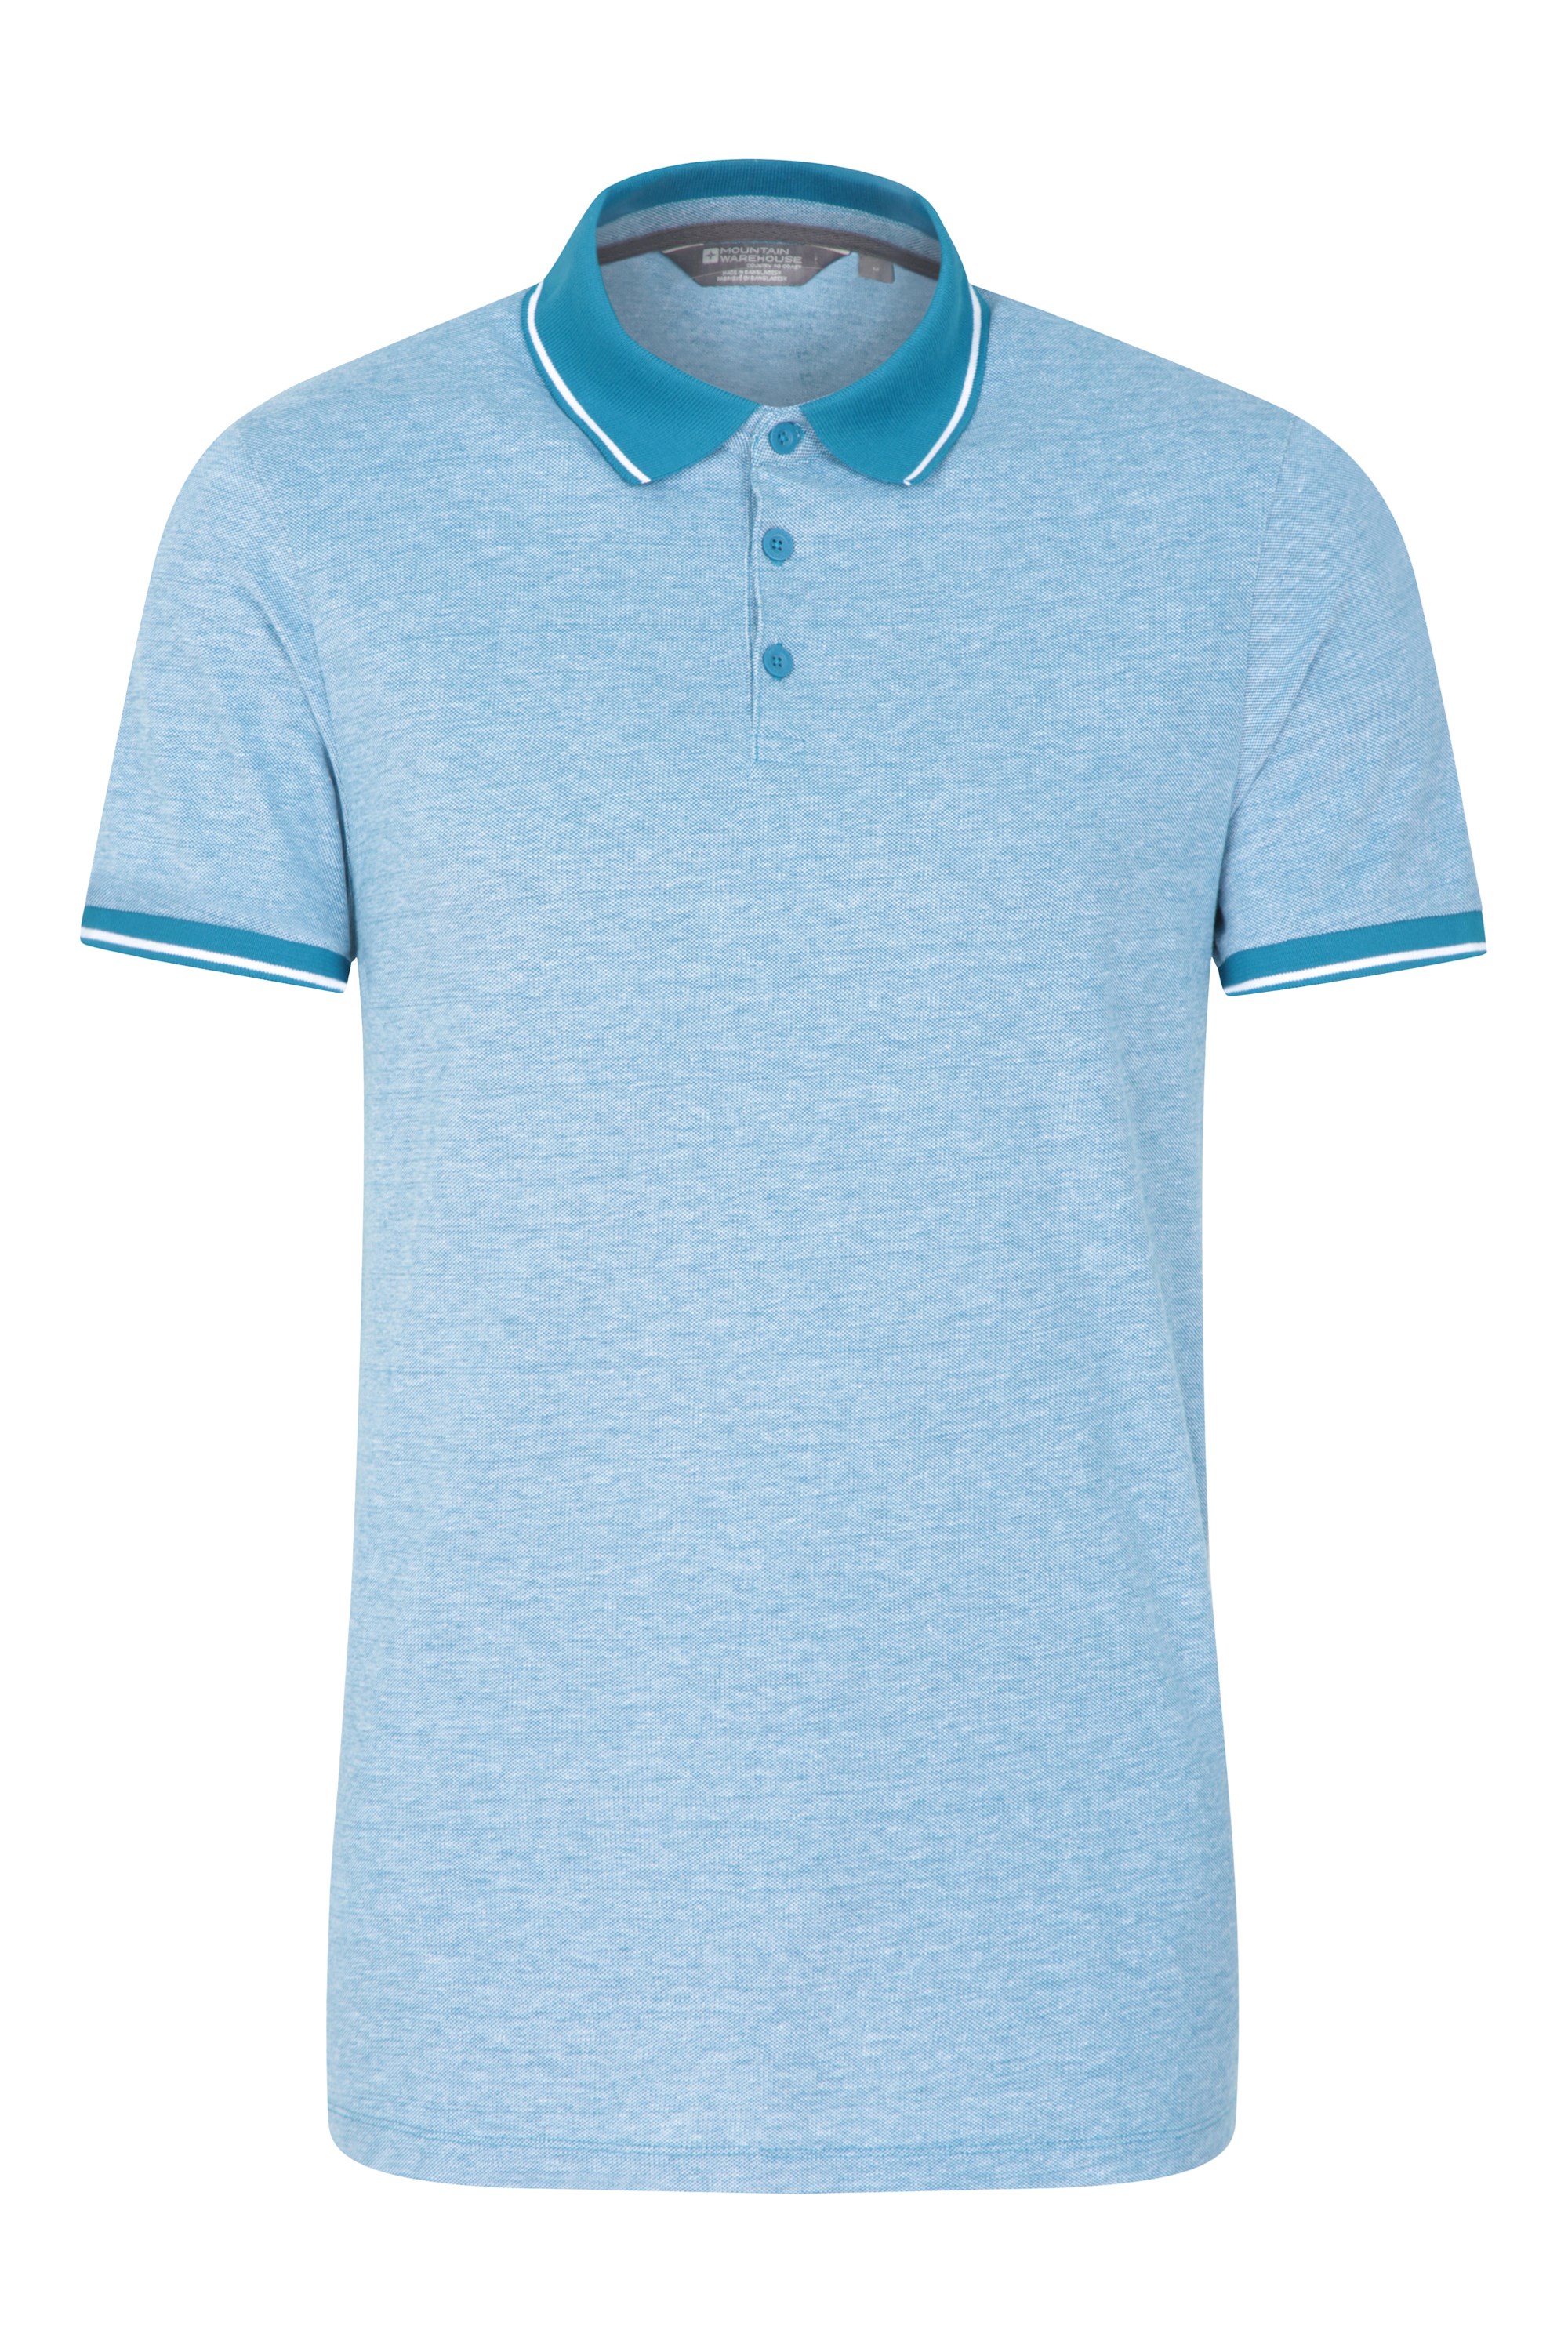 Clyde II Mens Polo - Charcoal